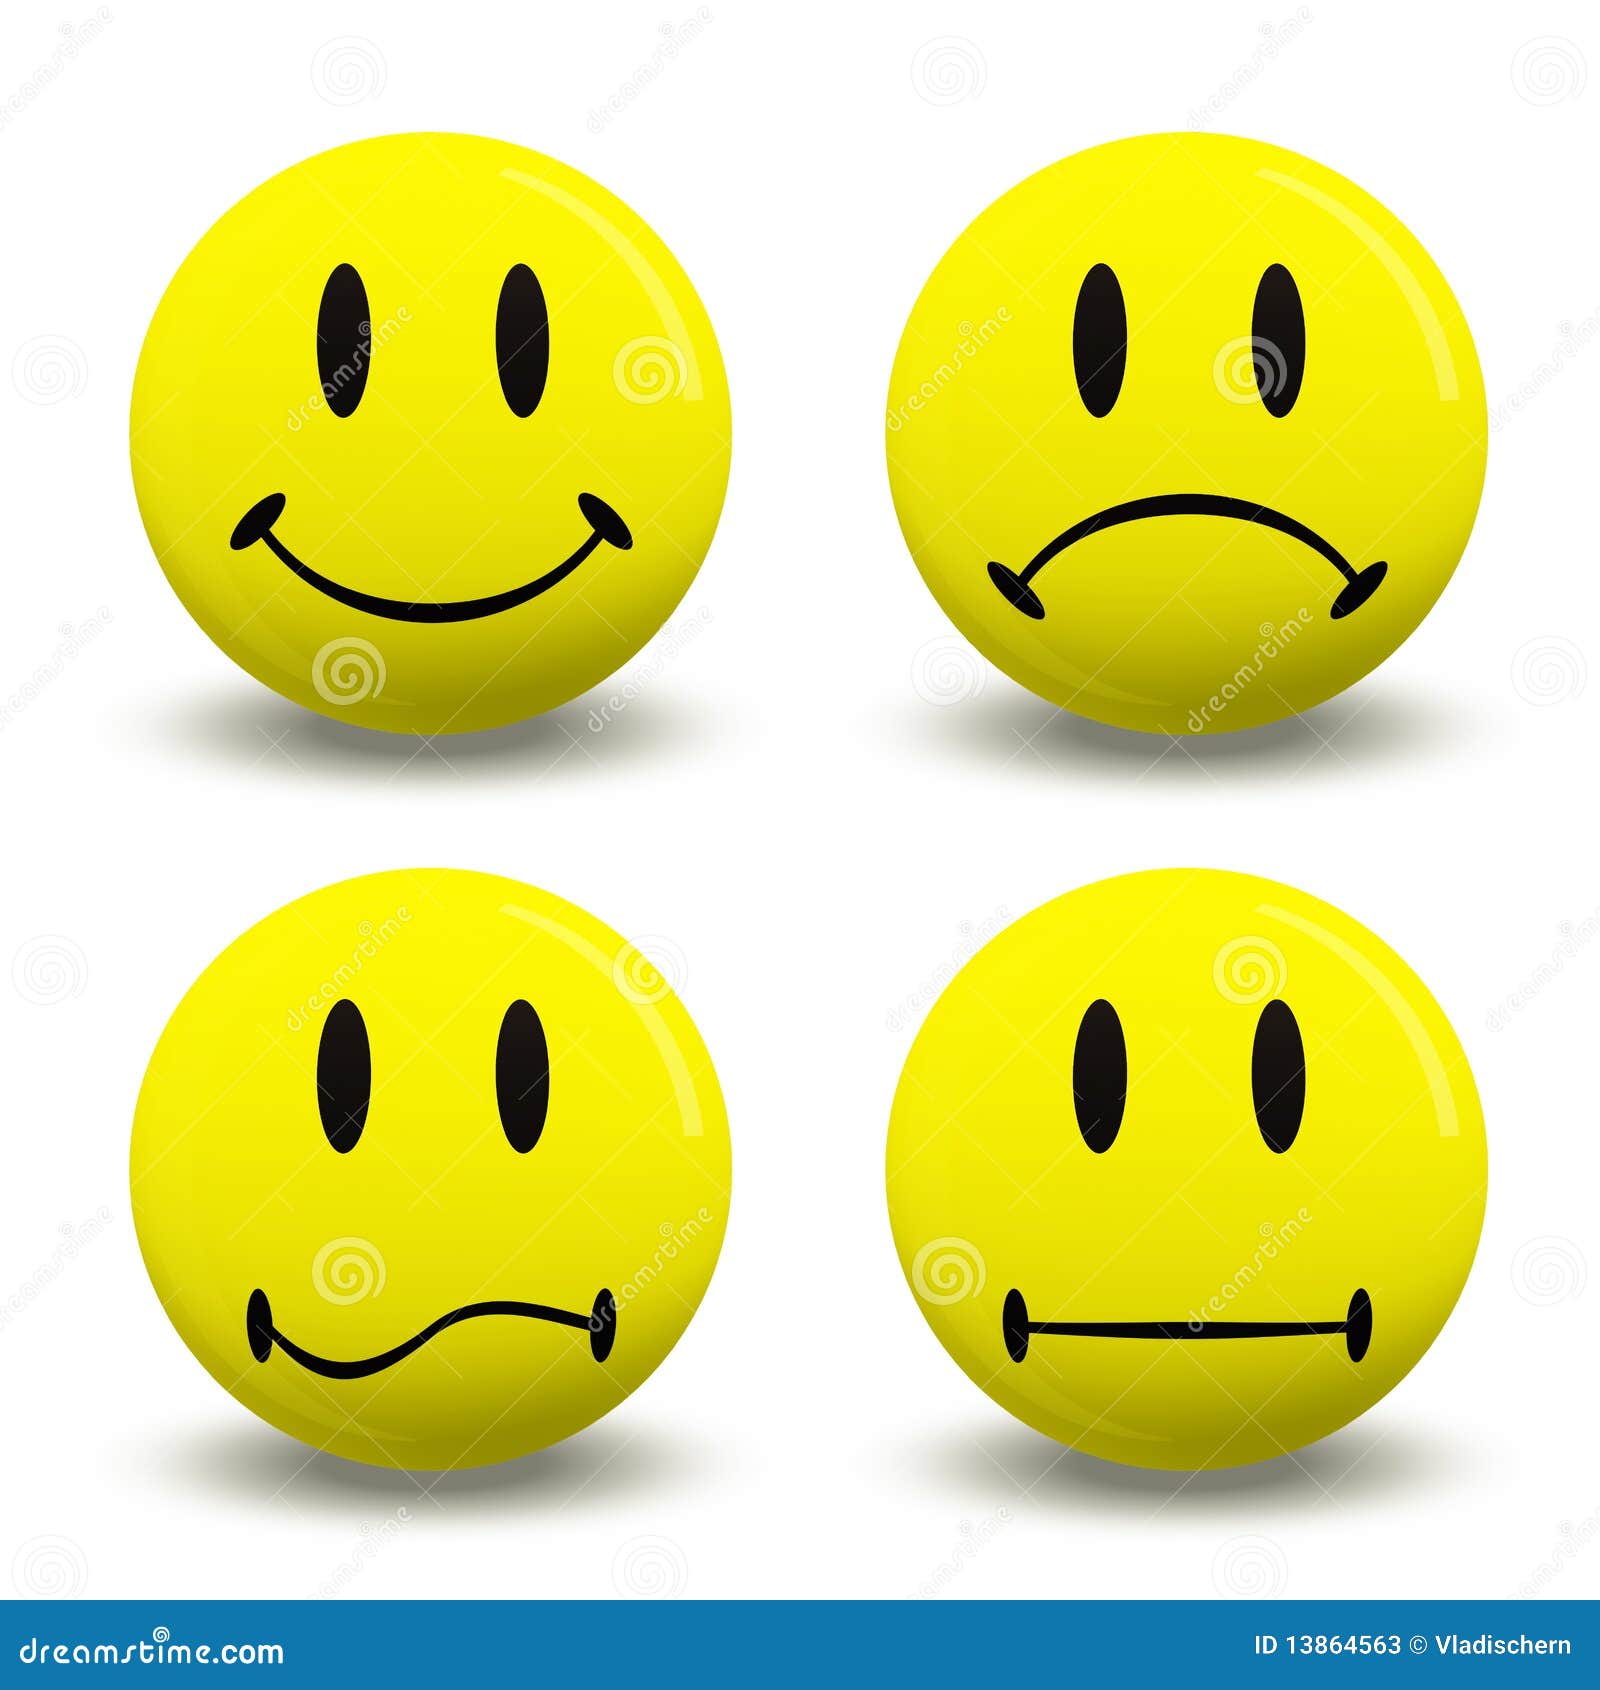 clipart of different emotions - photo #28